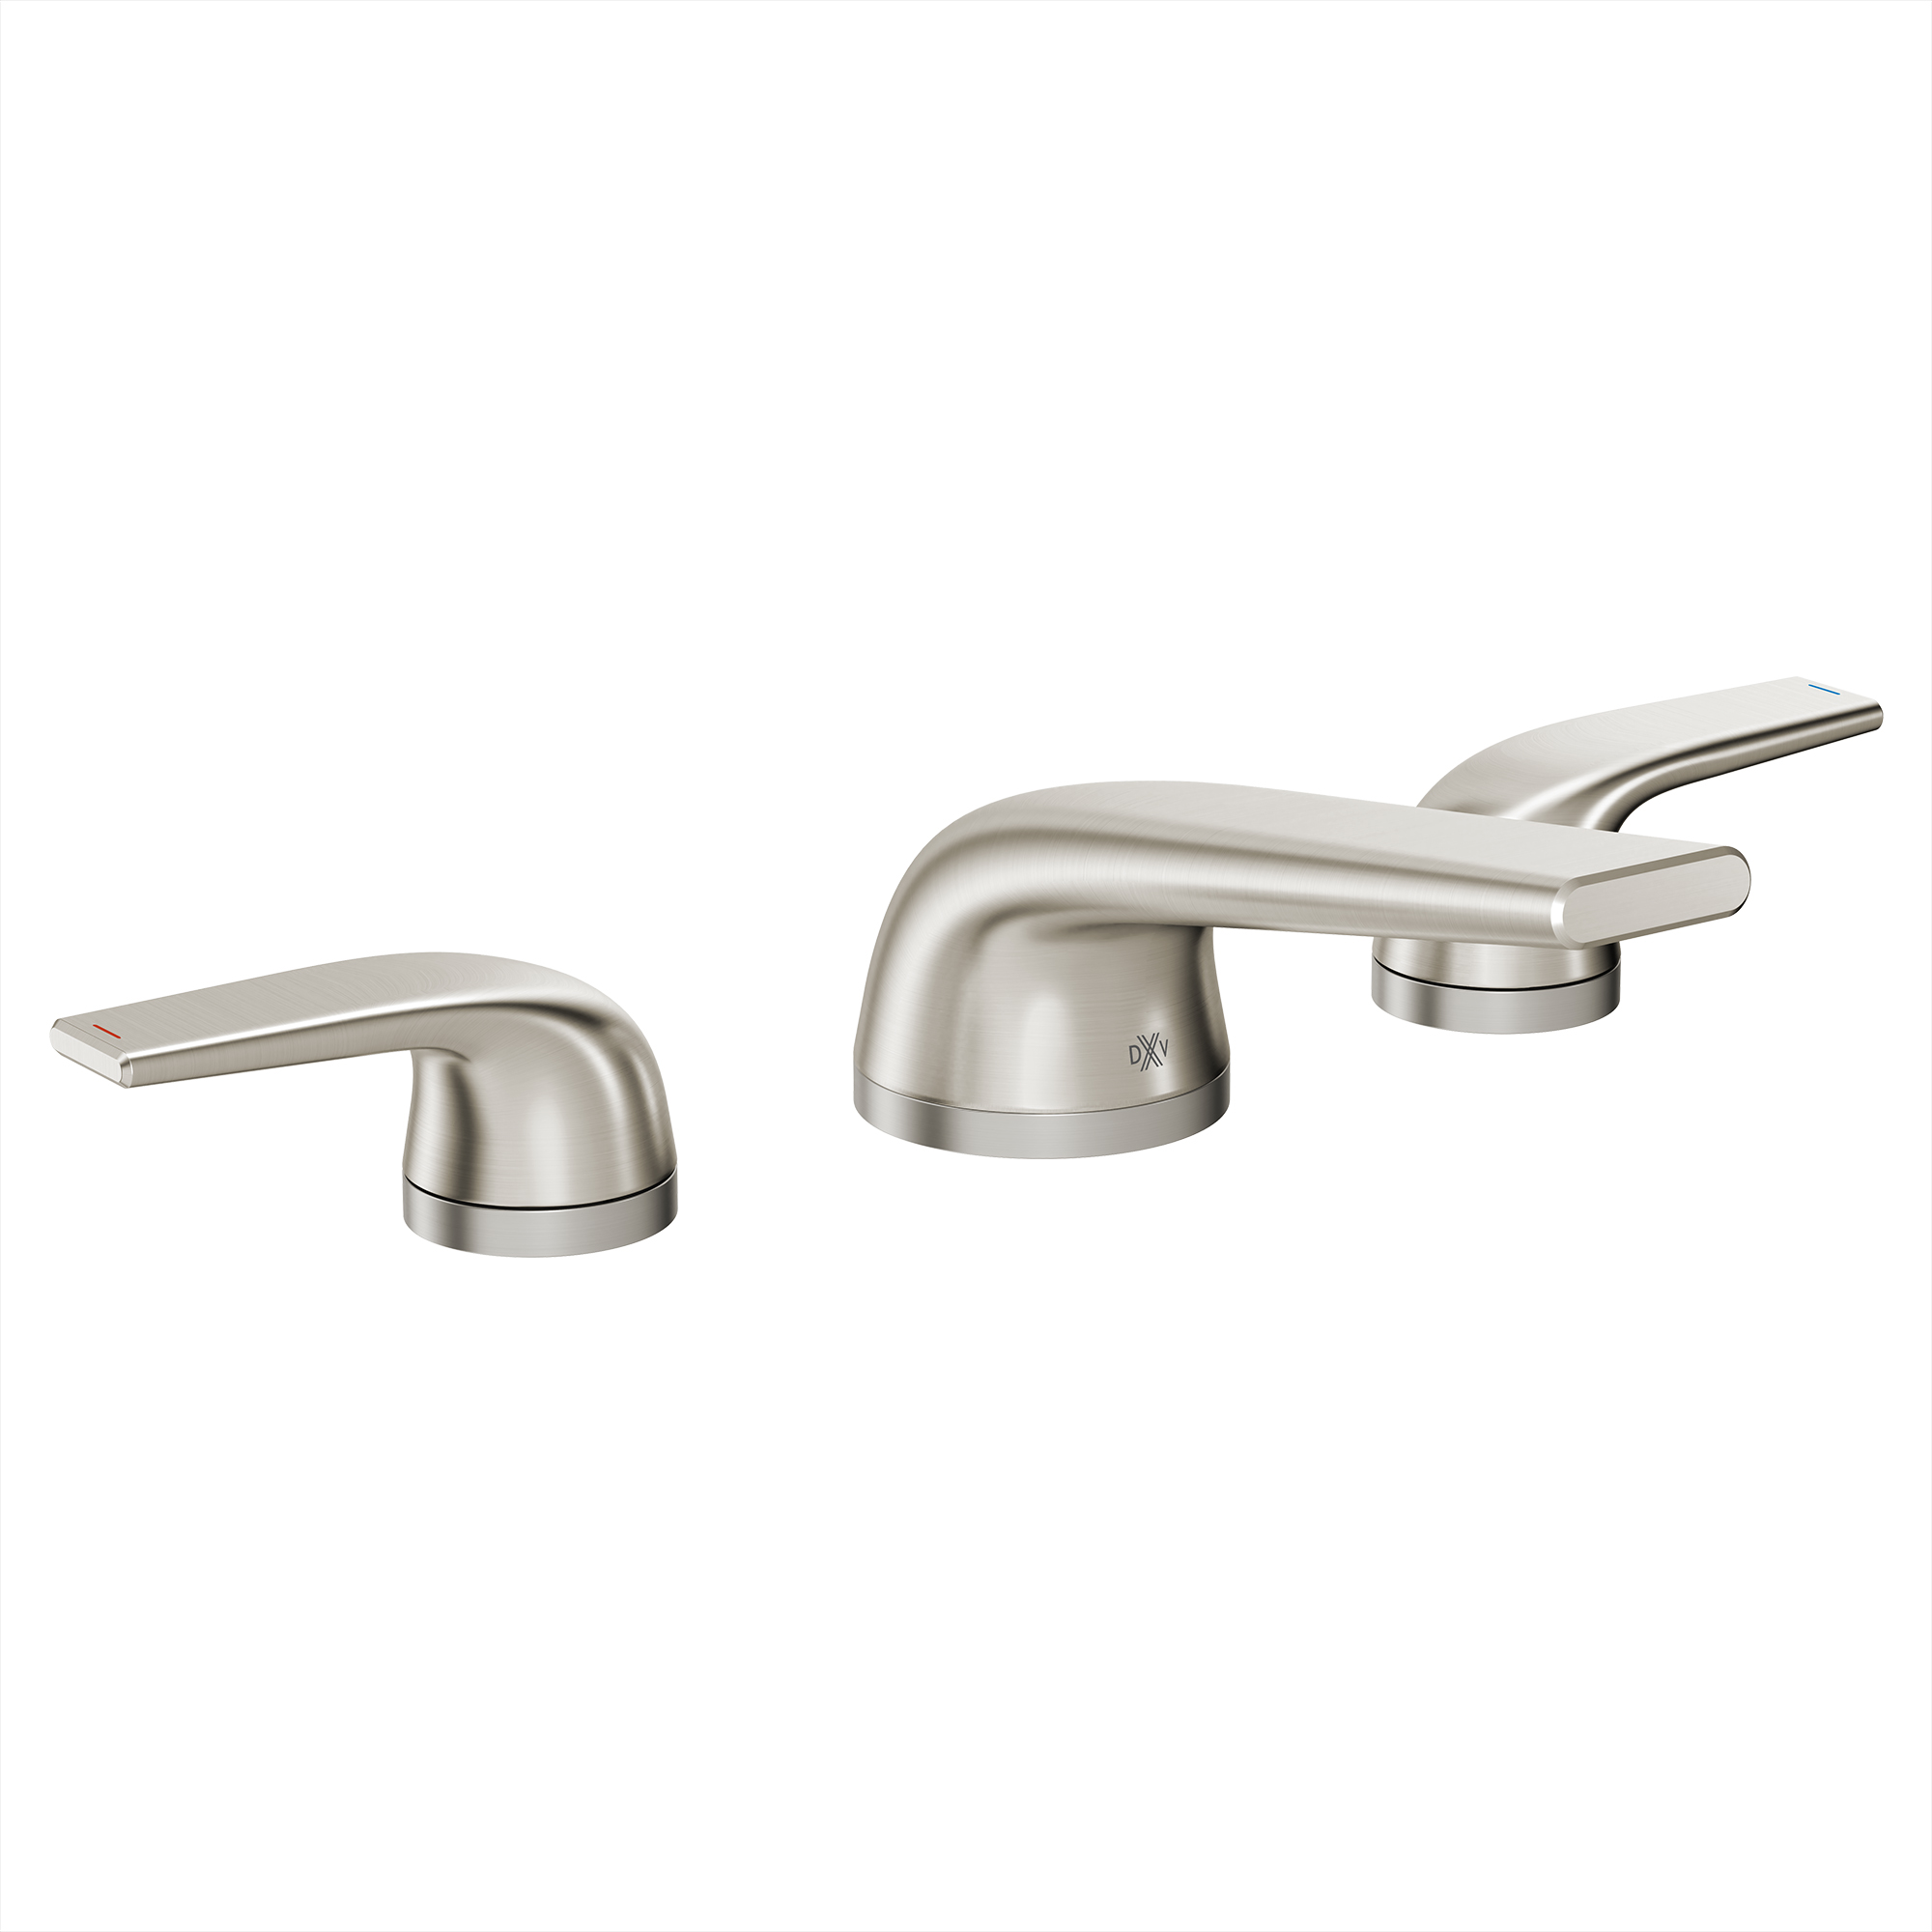 DXV Modulus® 2-Handle Widespread Bathroom Faucet with Indicator Markings and Lever Handles